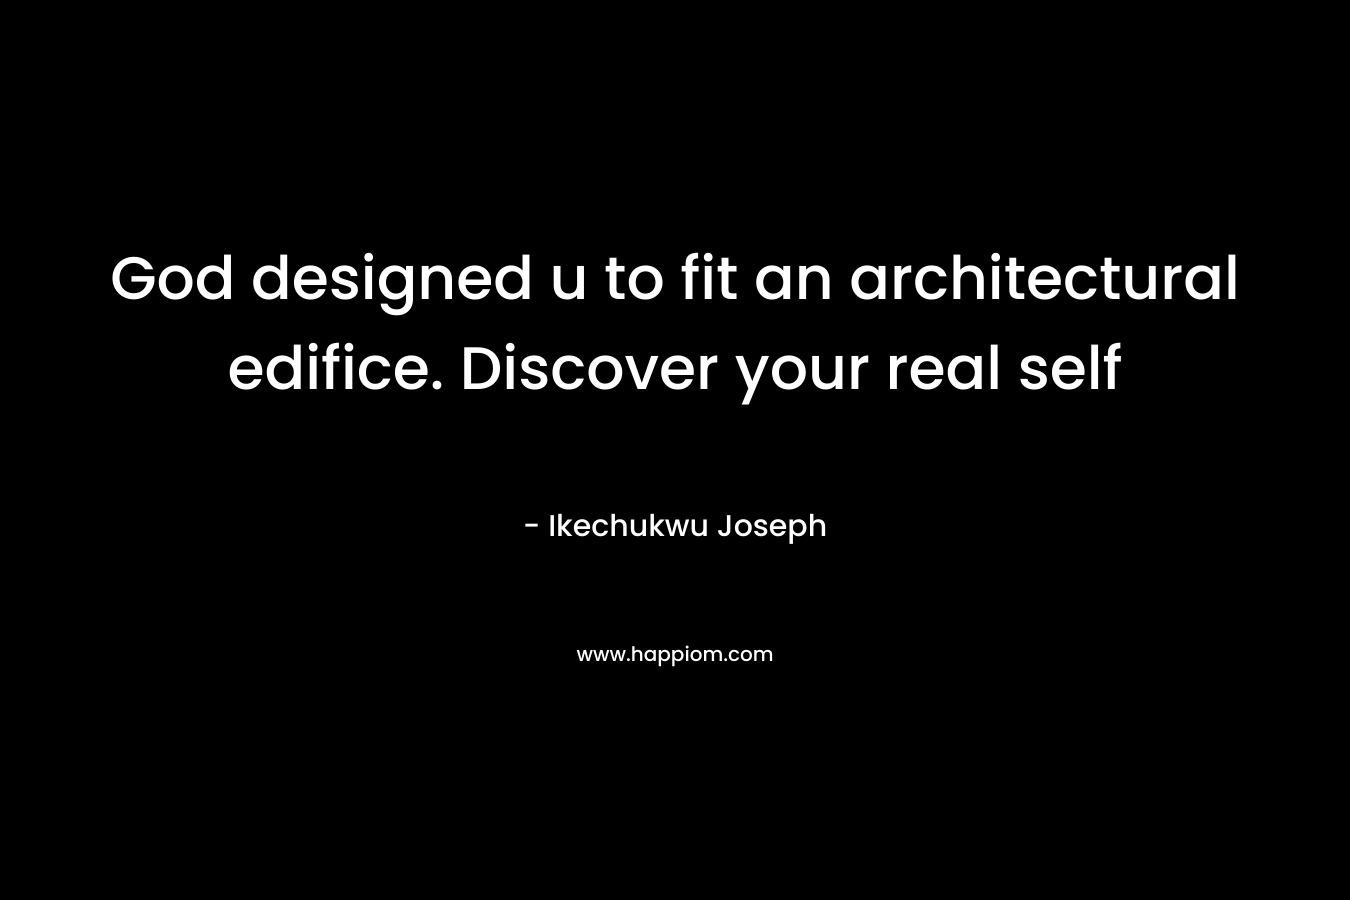 God designed u to fit an architectural edifice. Discover your real self